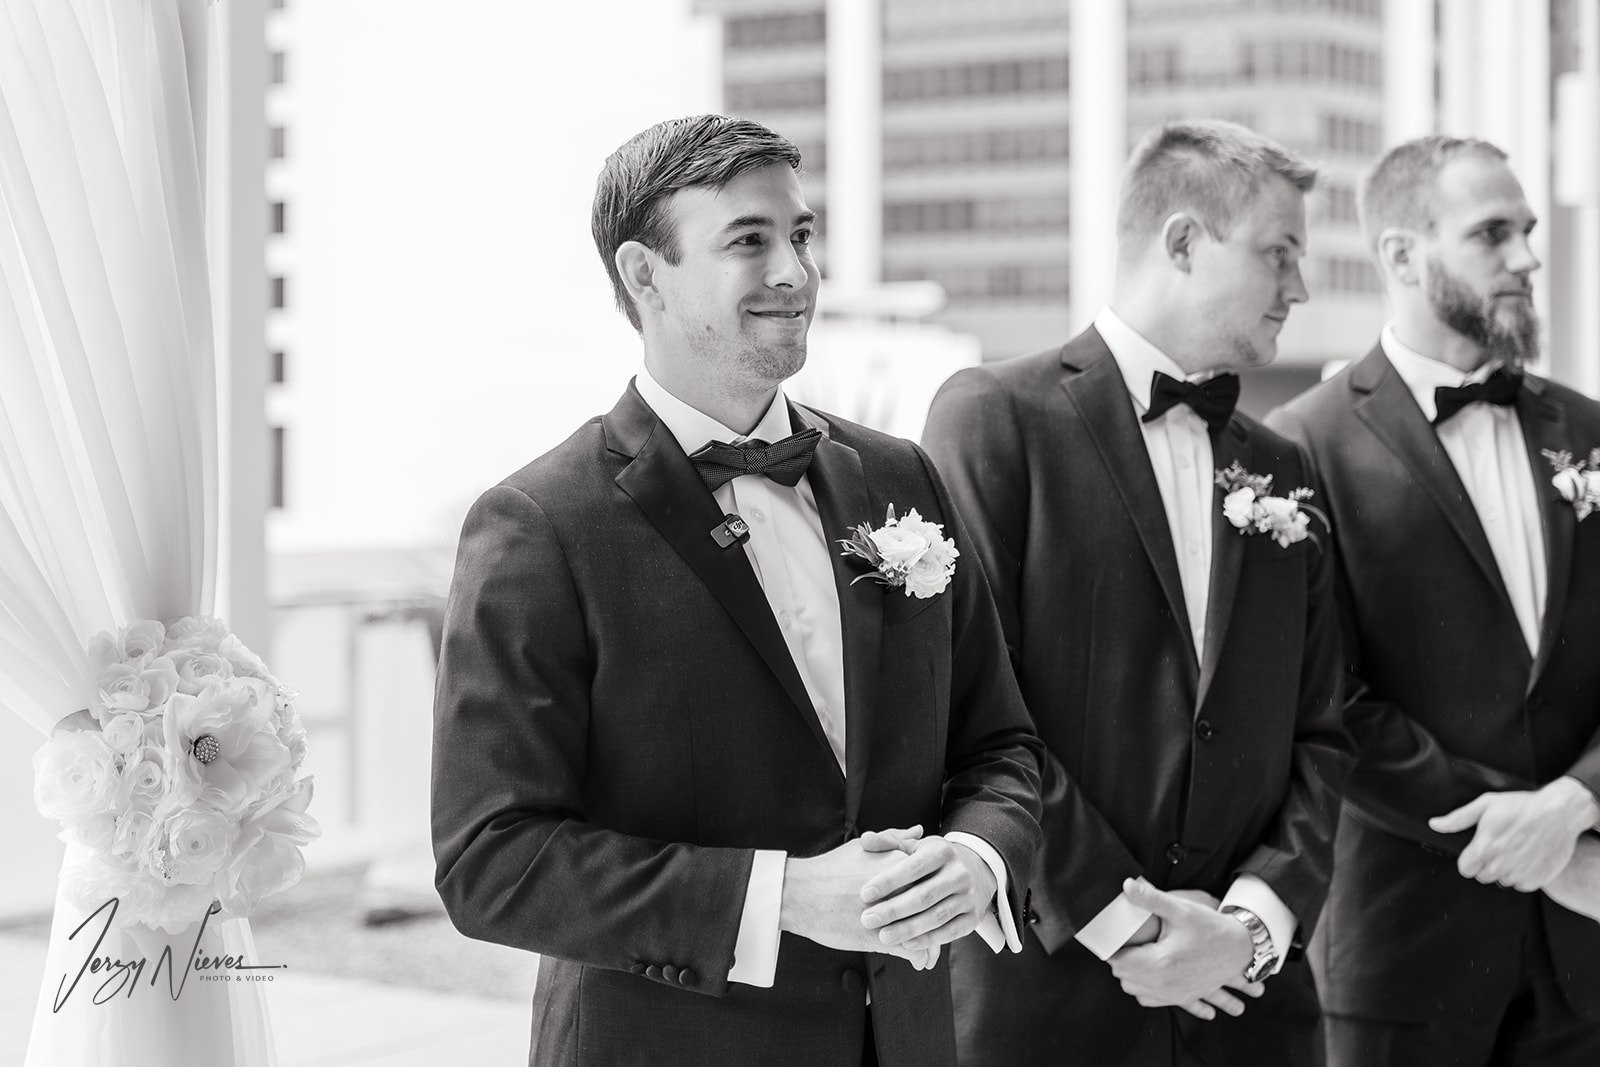 Black and white photo of groom Nathan watching his bride Brittany come down the aisle with his groomsmen by his side at Dr. Phillips Center for Performing Arts.